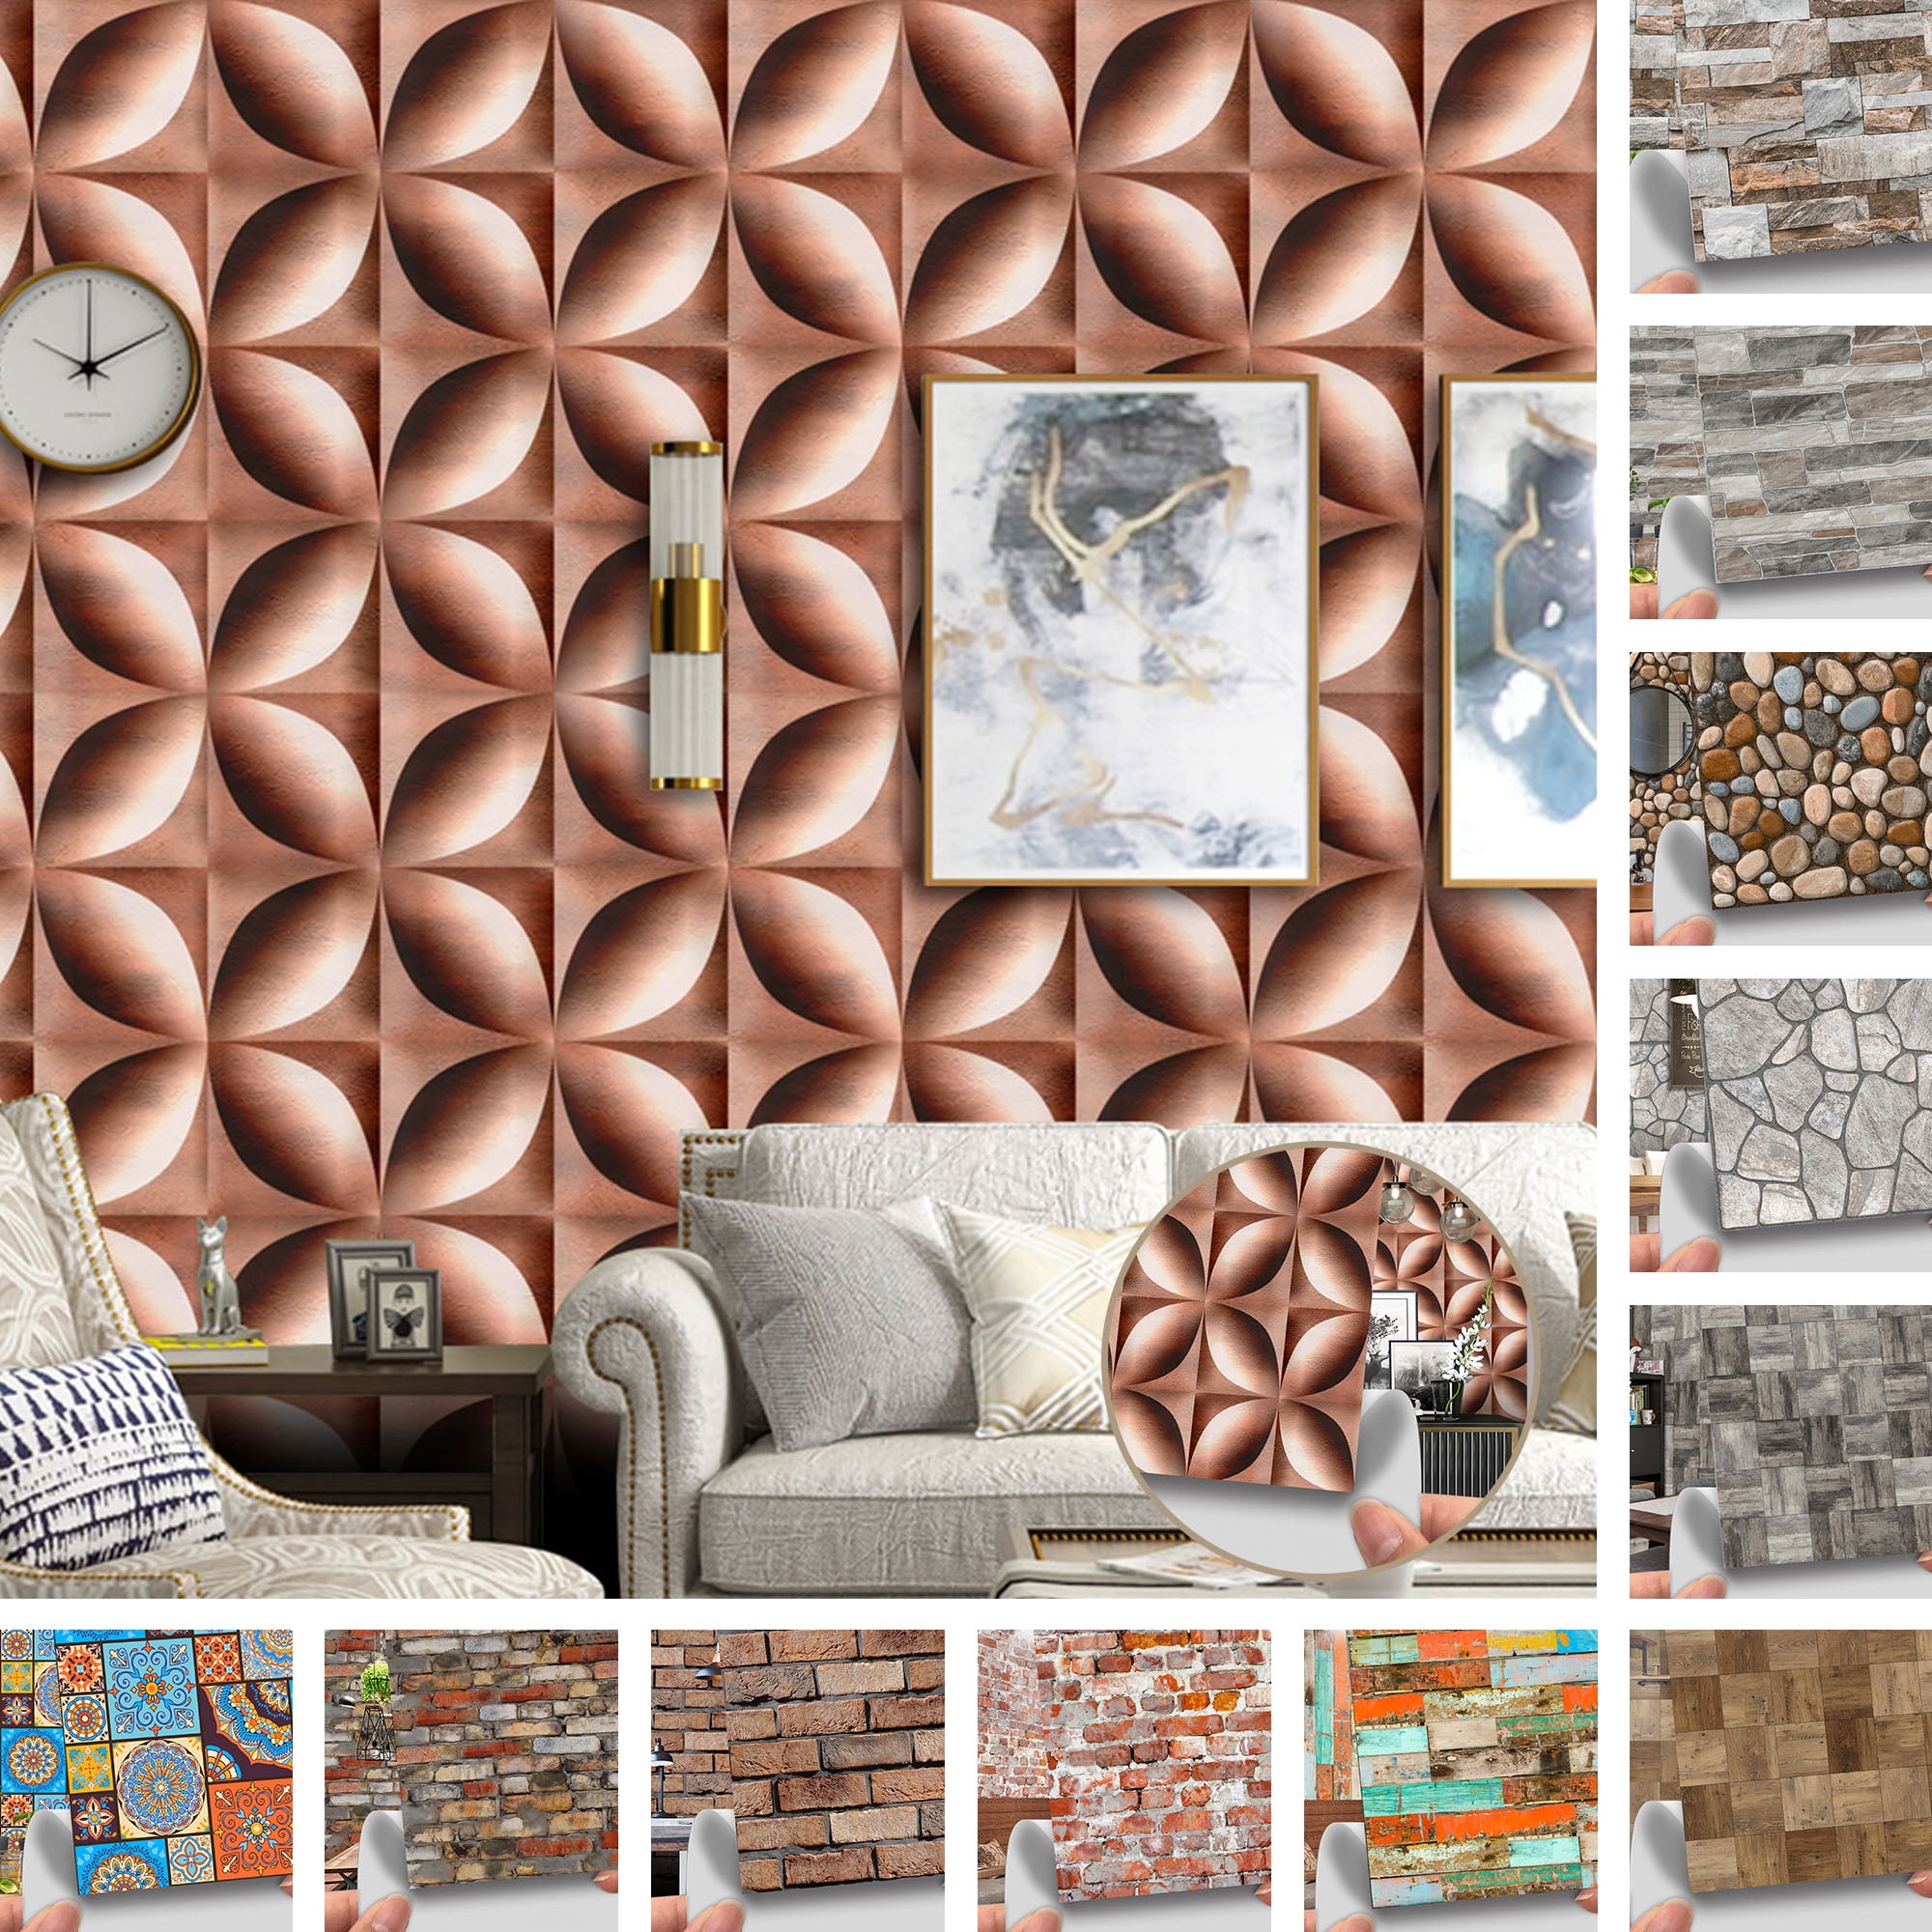 Details about   3D Tile Brick Stone Wall Sticker Self Adhesive 18pcs PVC Waterproof Decals Decor